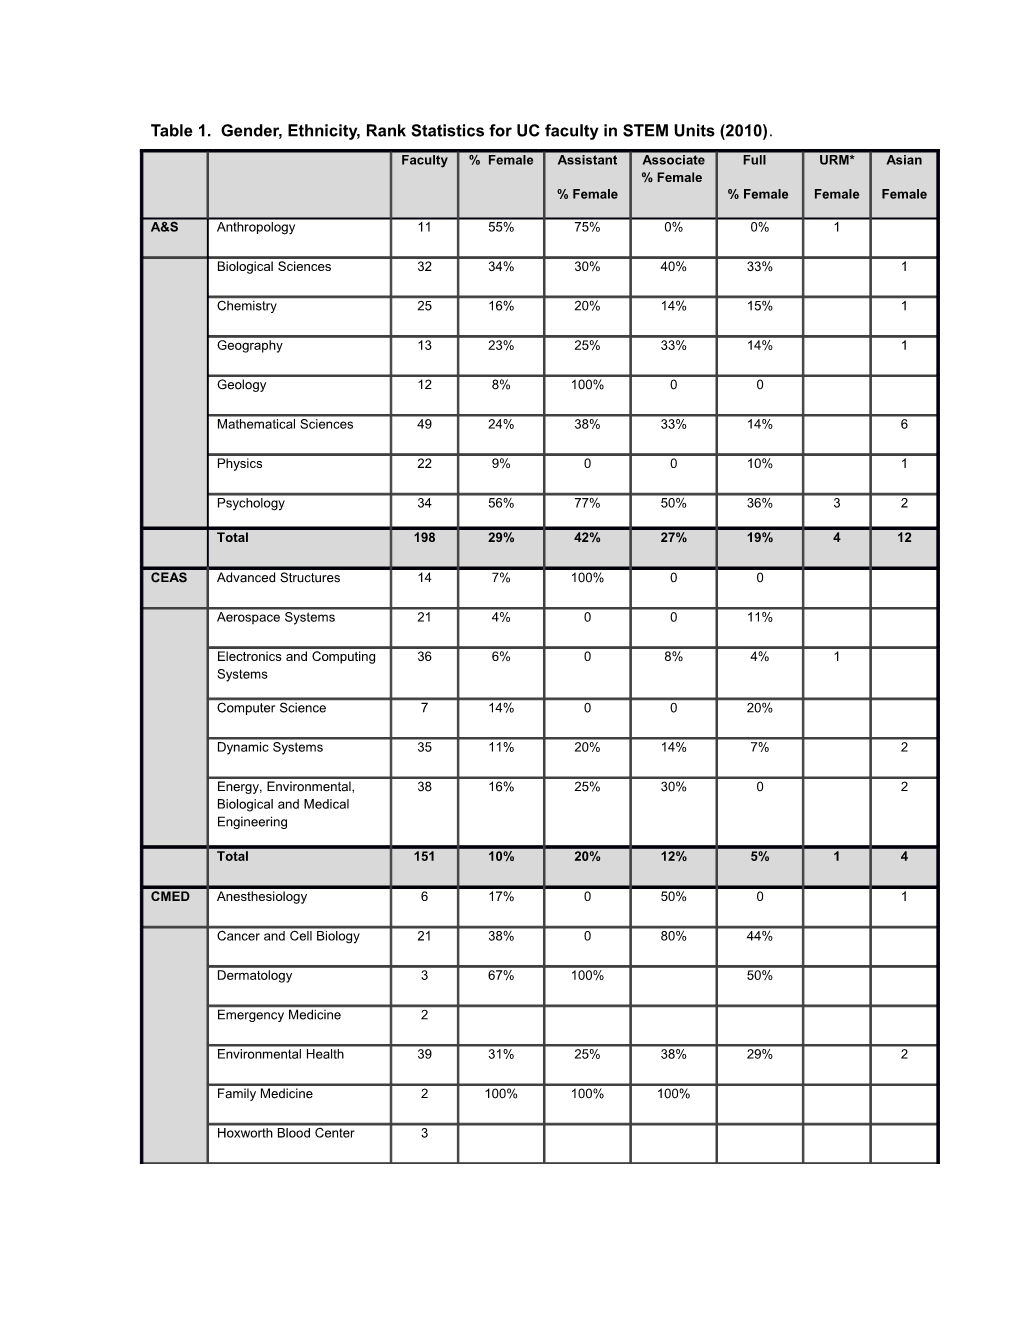 Table 1. Gender, Ethnicity, Rank Statistics for UC Faculty in STEM Units (2010)